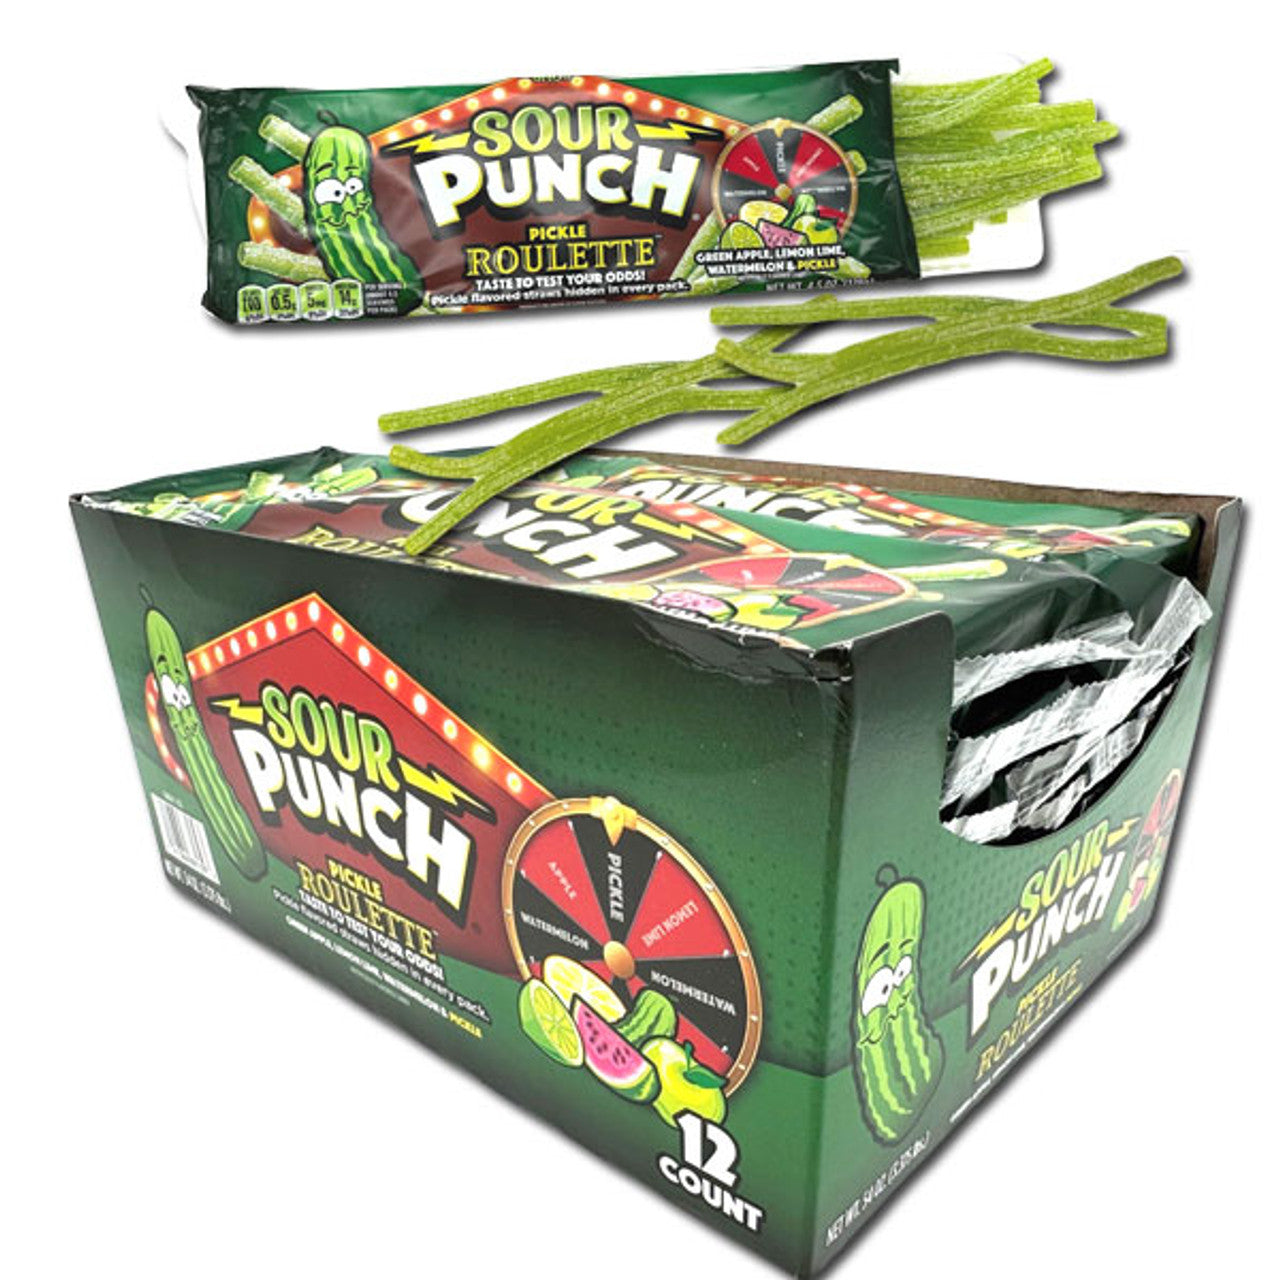 Sour Punch Pickle Roulette Limited Edition 4.5oz Pack